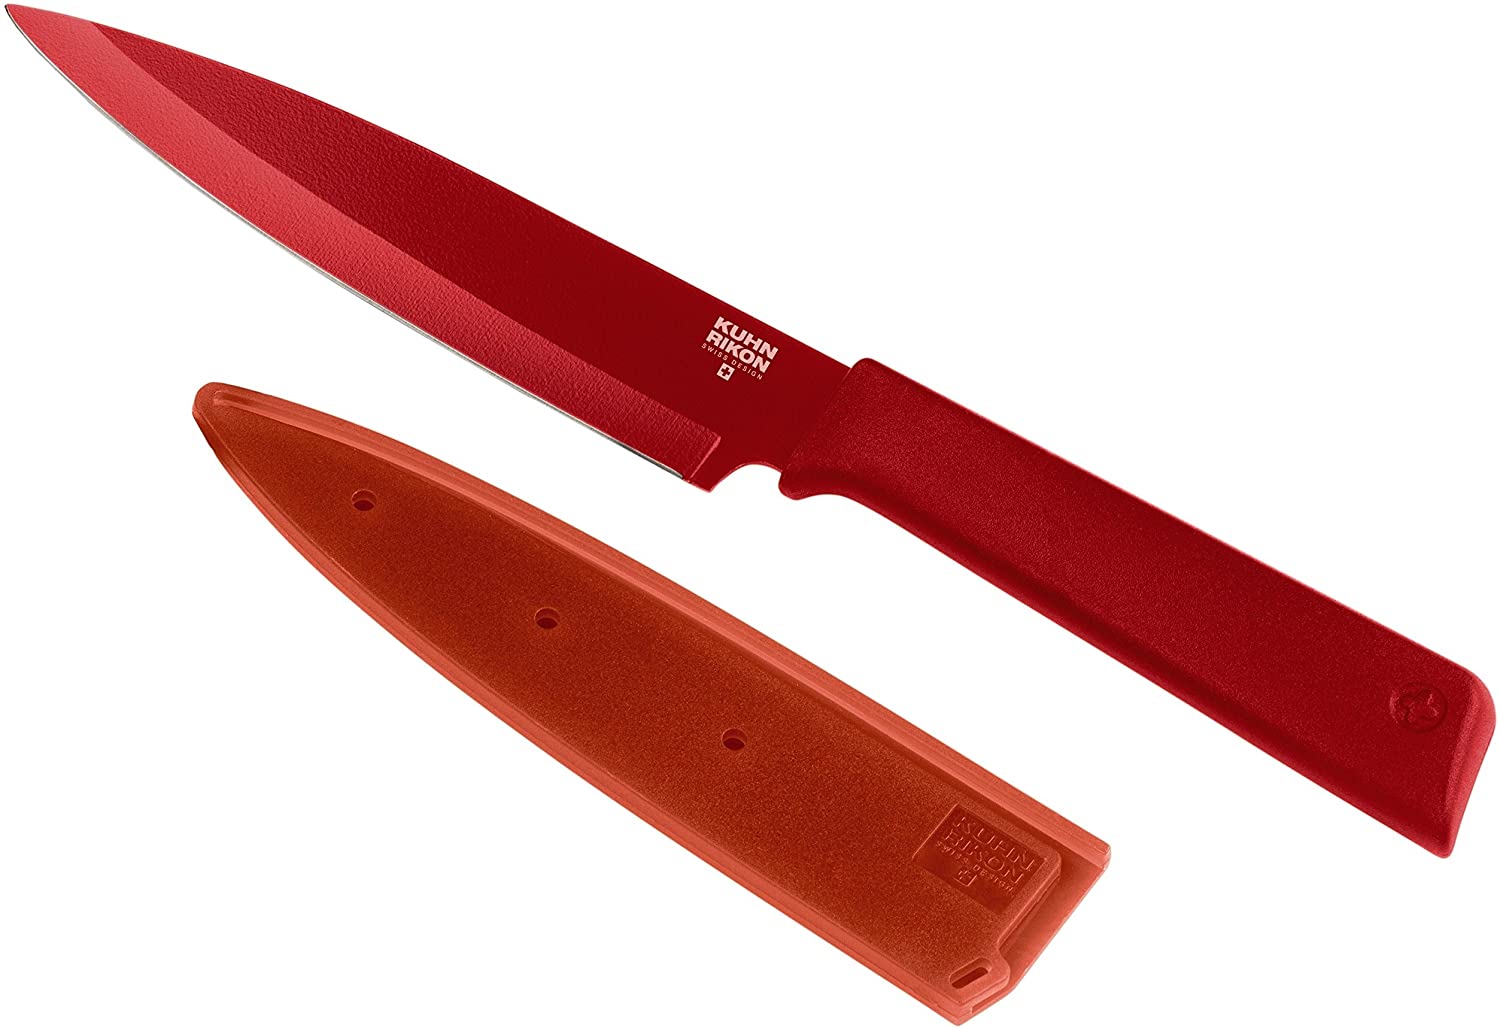 Kuhn Rikon Colori+ Non-Stick Utility Knife with Safety Sheath, 23 cm, Red